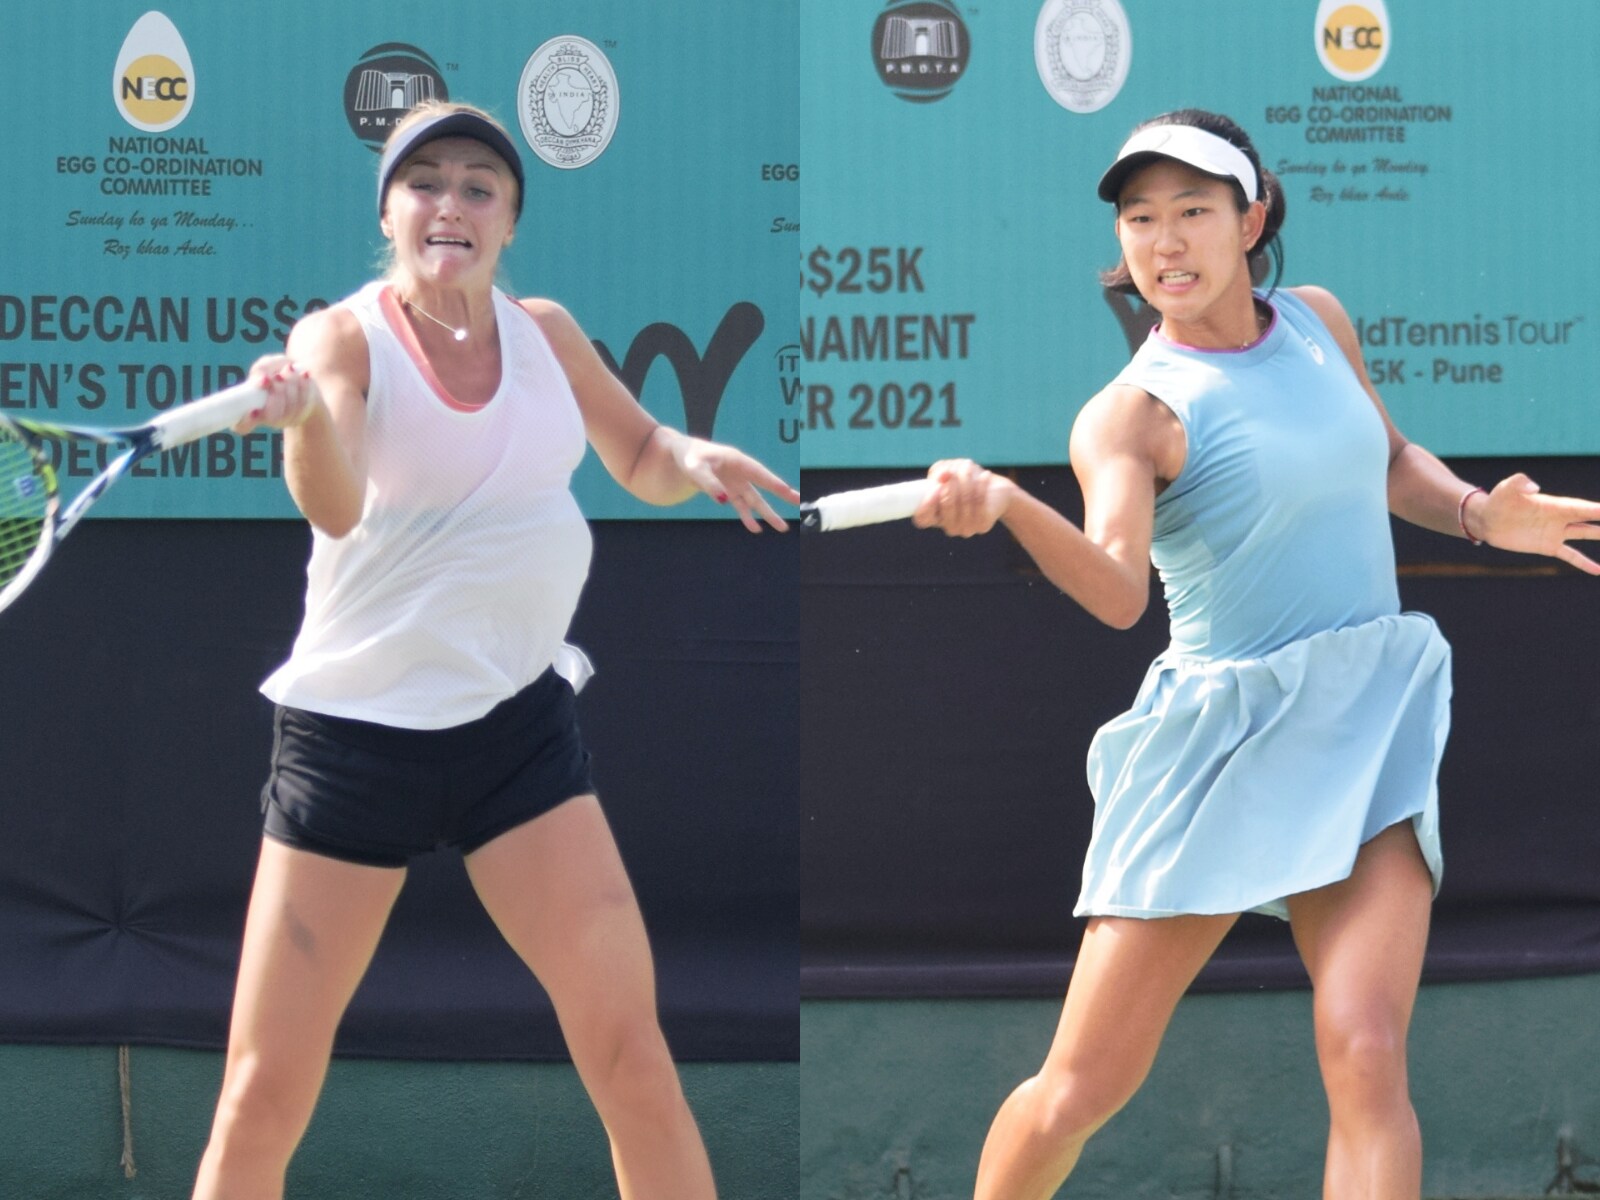 NECC DECCAN ITF Womens Tournament 4th Seed Diana Marcinkevica to Face Unseeded Moyuka Uchijima in Final